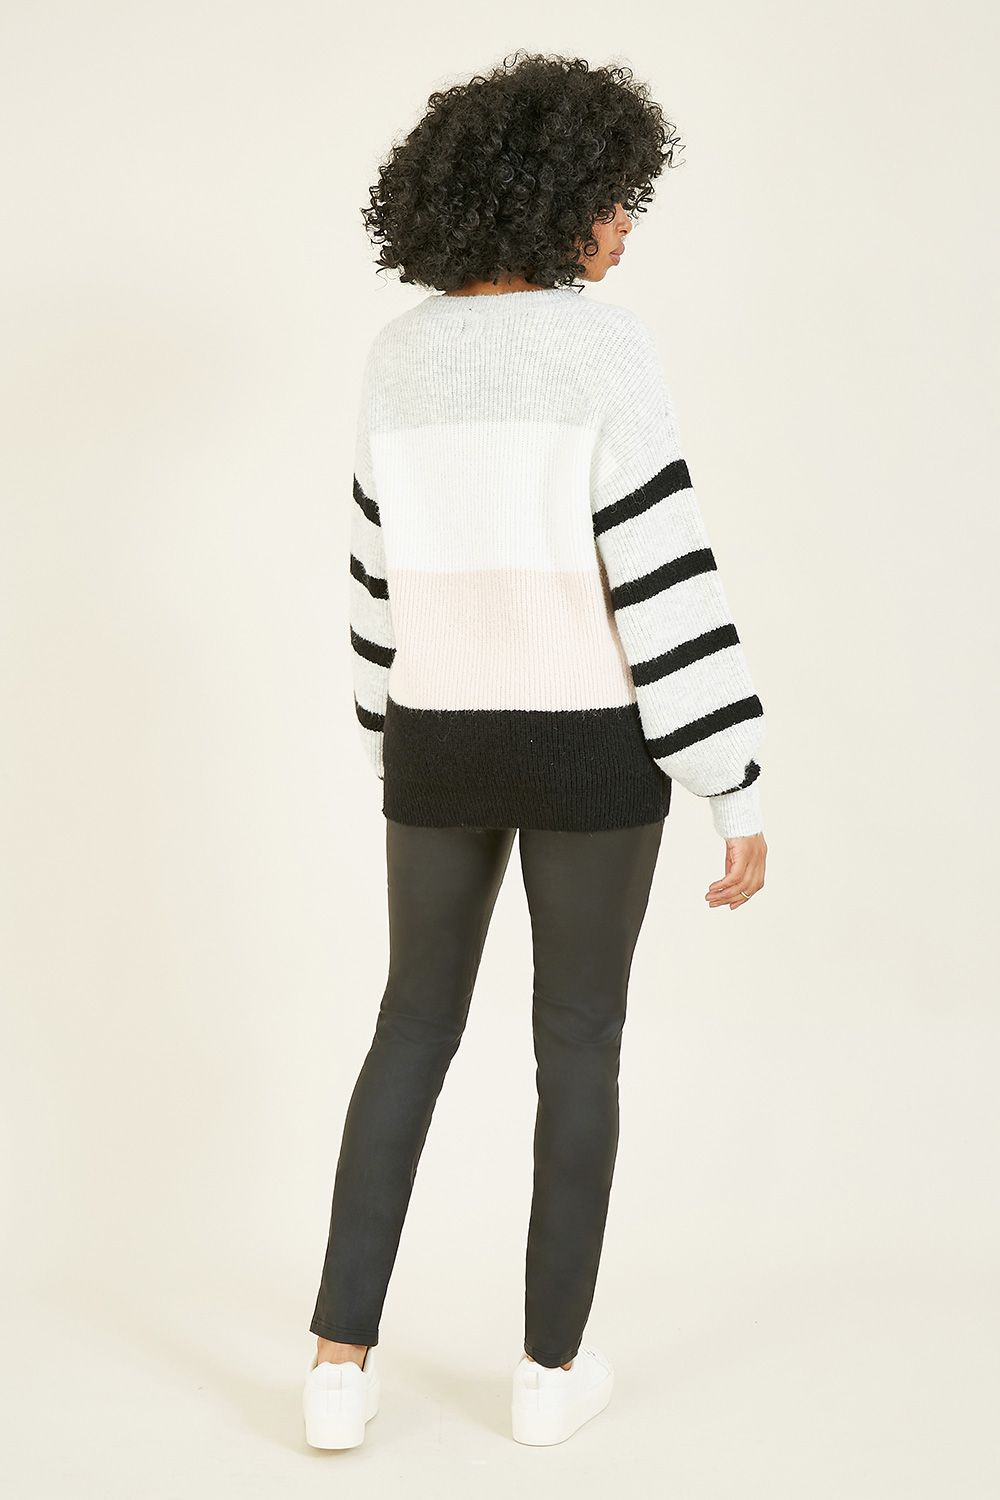 Monochrome but make it cosy. This super soft Yumi Block Stripe Knitted Jumper is a stunning piece, featuring a block/stripe pattern and relaxed sleeves. Perfect officewear, relaxed weekend wear, or dressed up with leather trousers and heels.